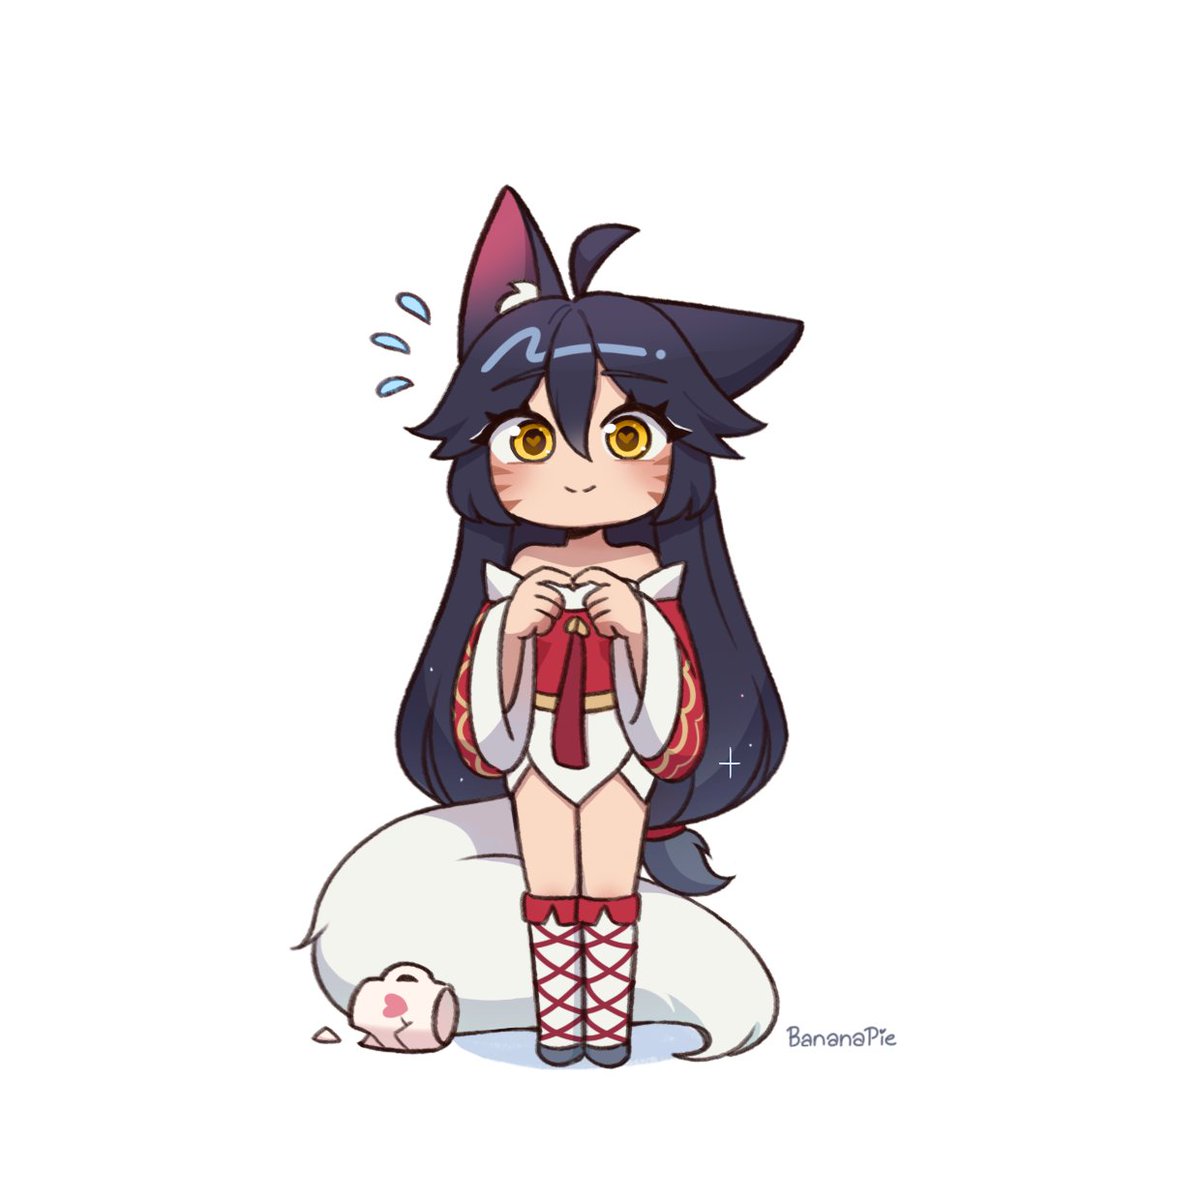 I refined one of the stickers.
Have a guilty Ahri 👉👈